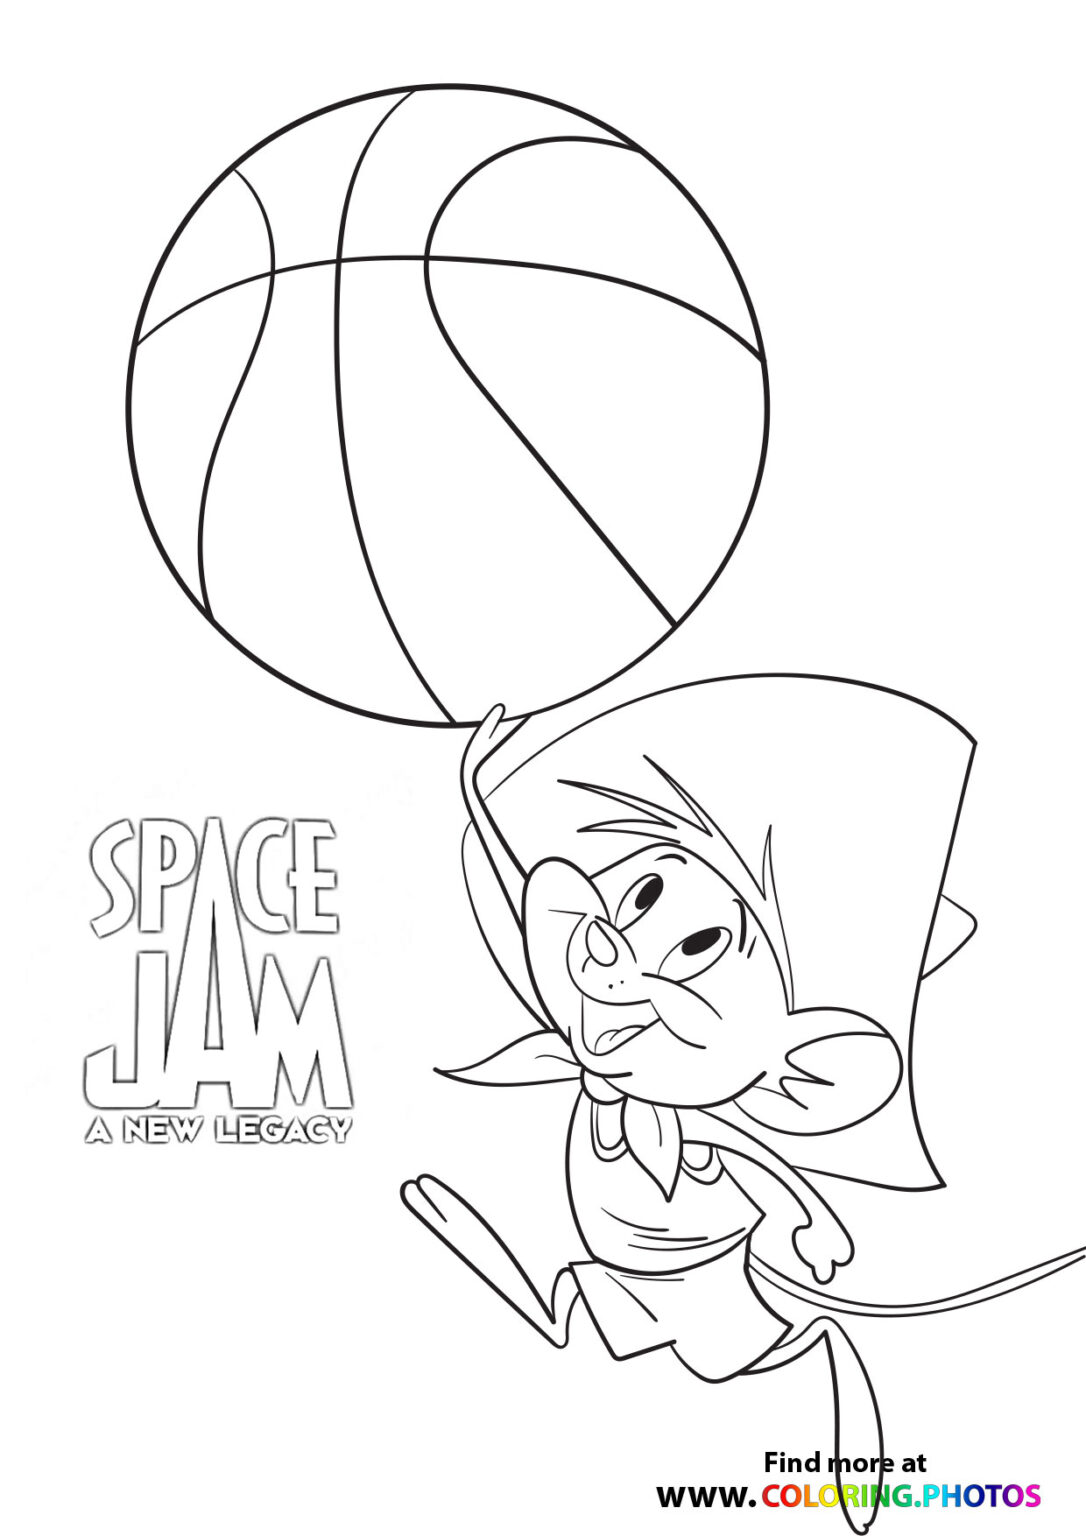 space-jam-2-a-new-legacy-coloring-pages-for-kids-free-coloring-page